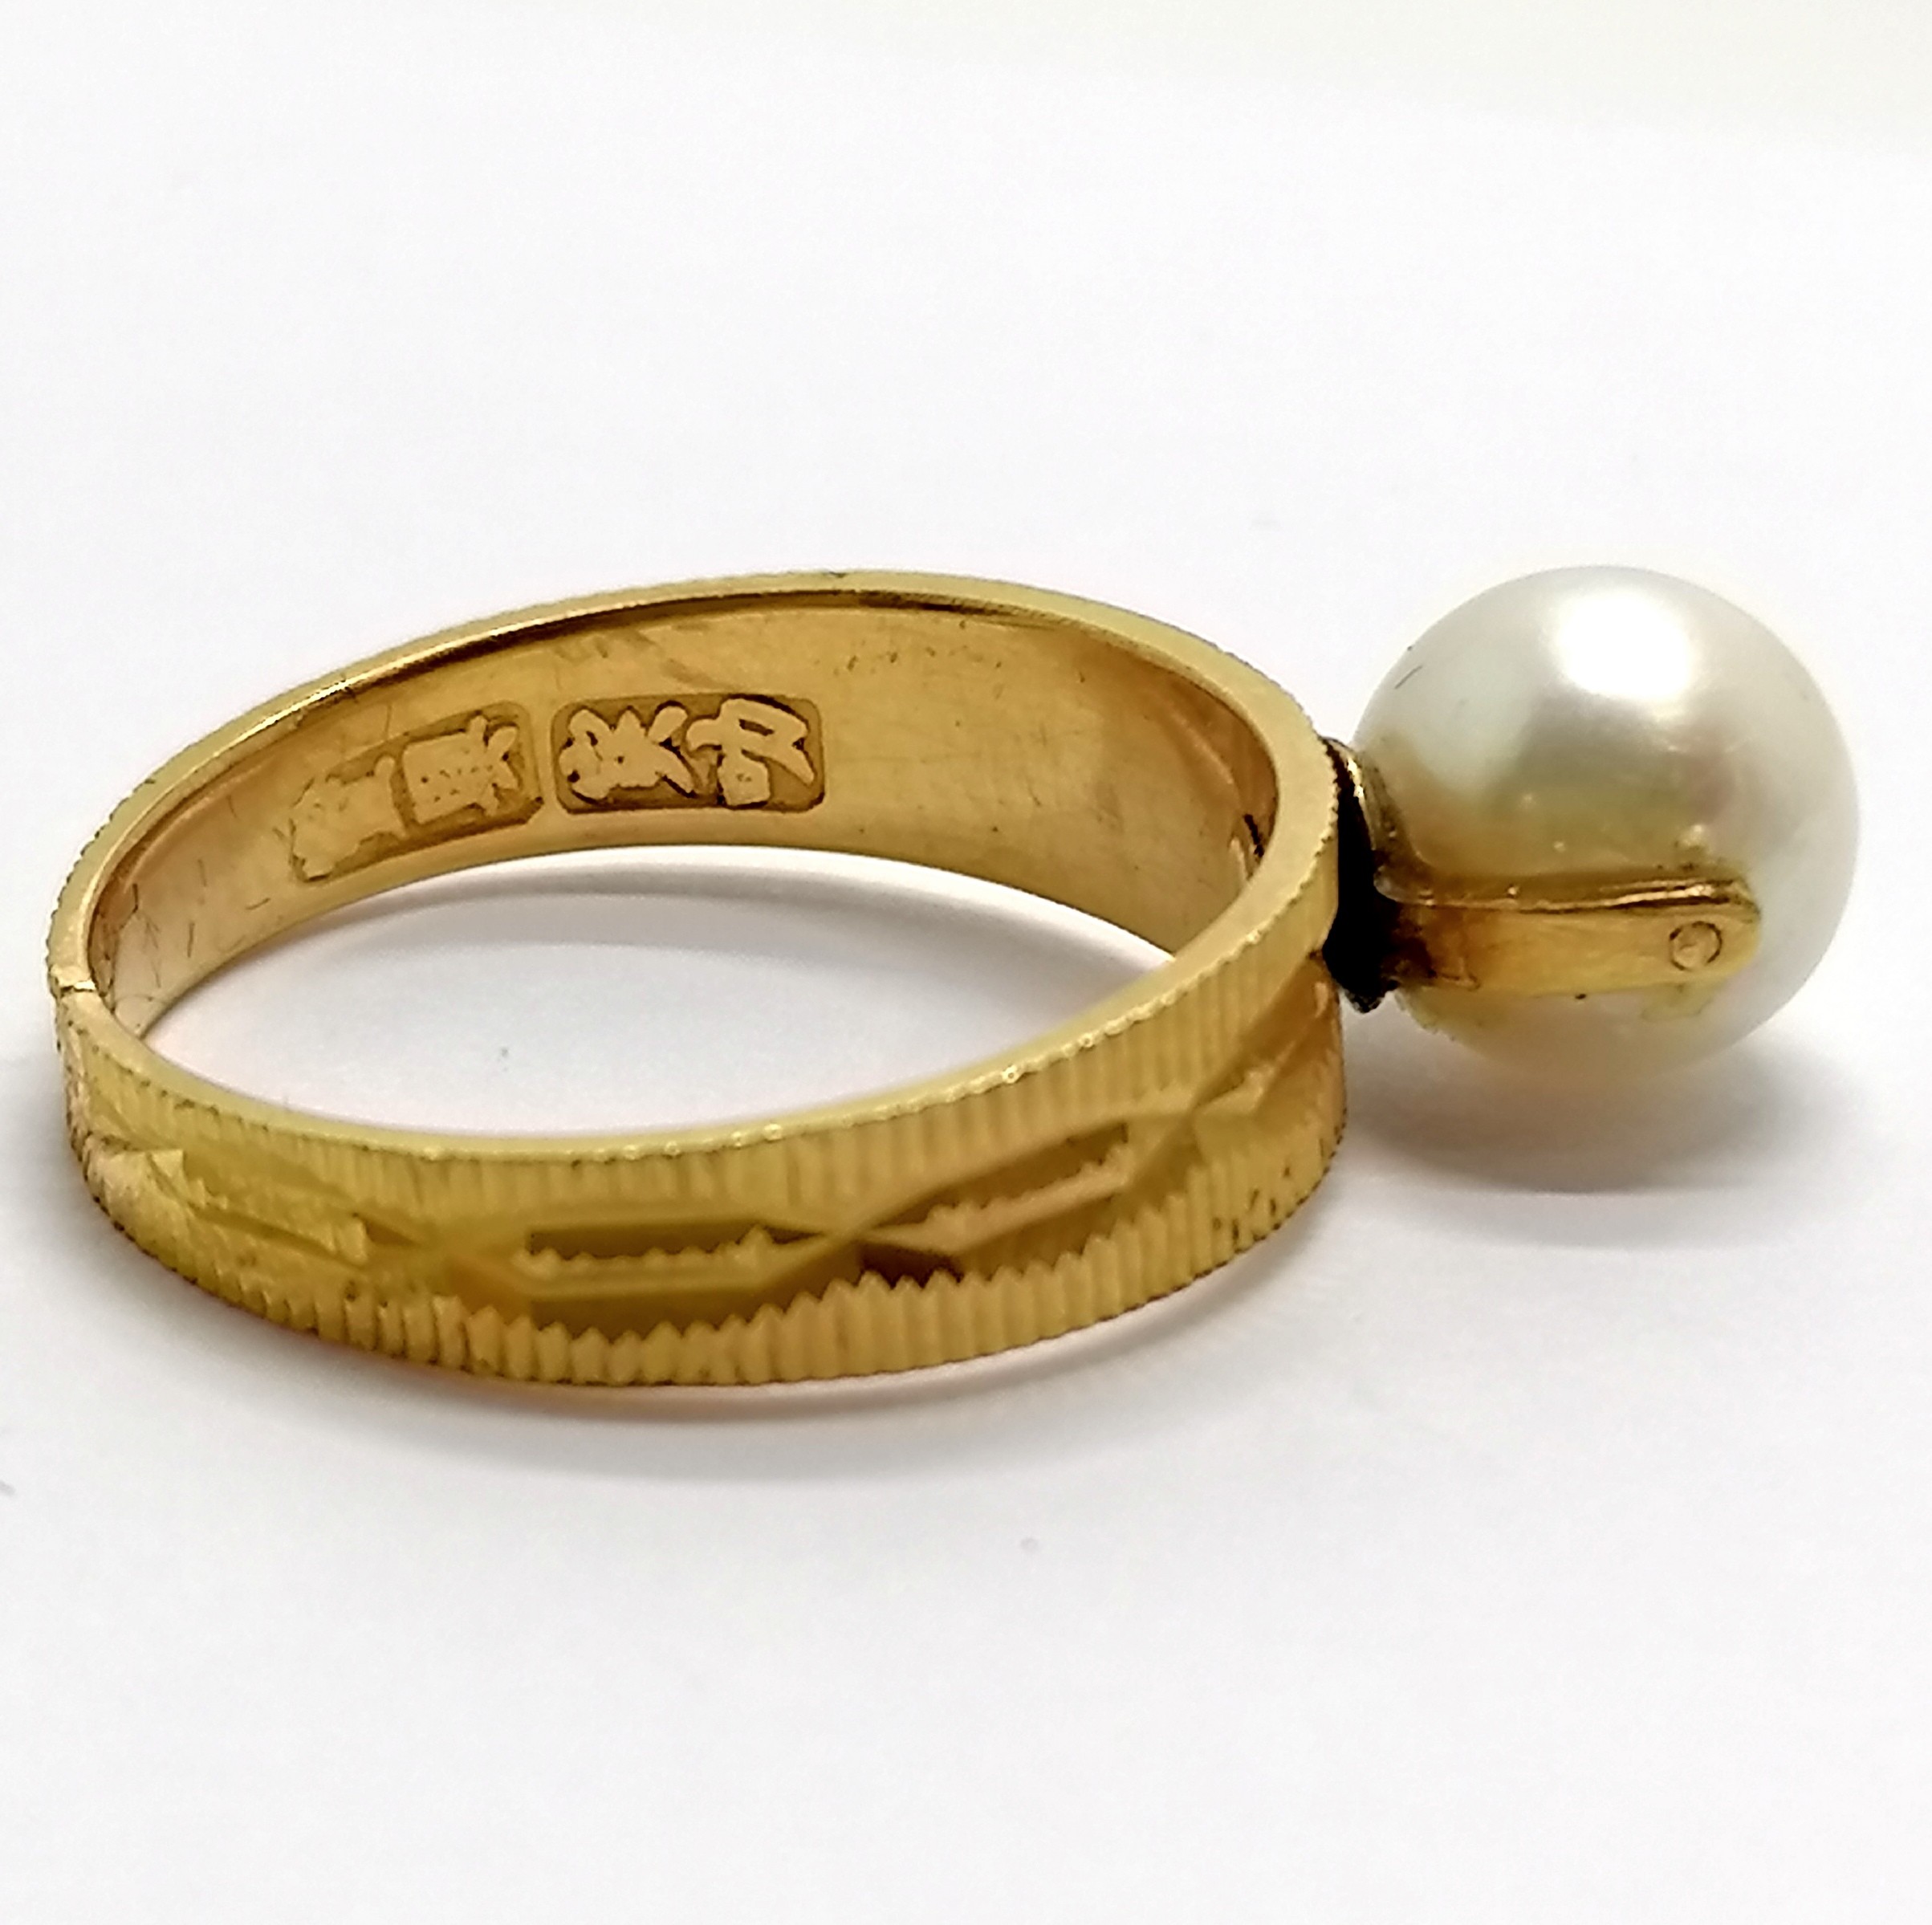 Chinese high carat gold (touch tests as 22ct) ring set with a pearl (8mm diameter) - the shank is